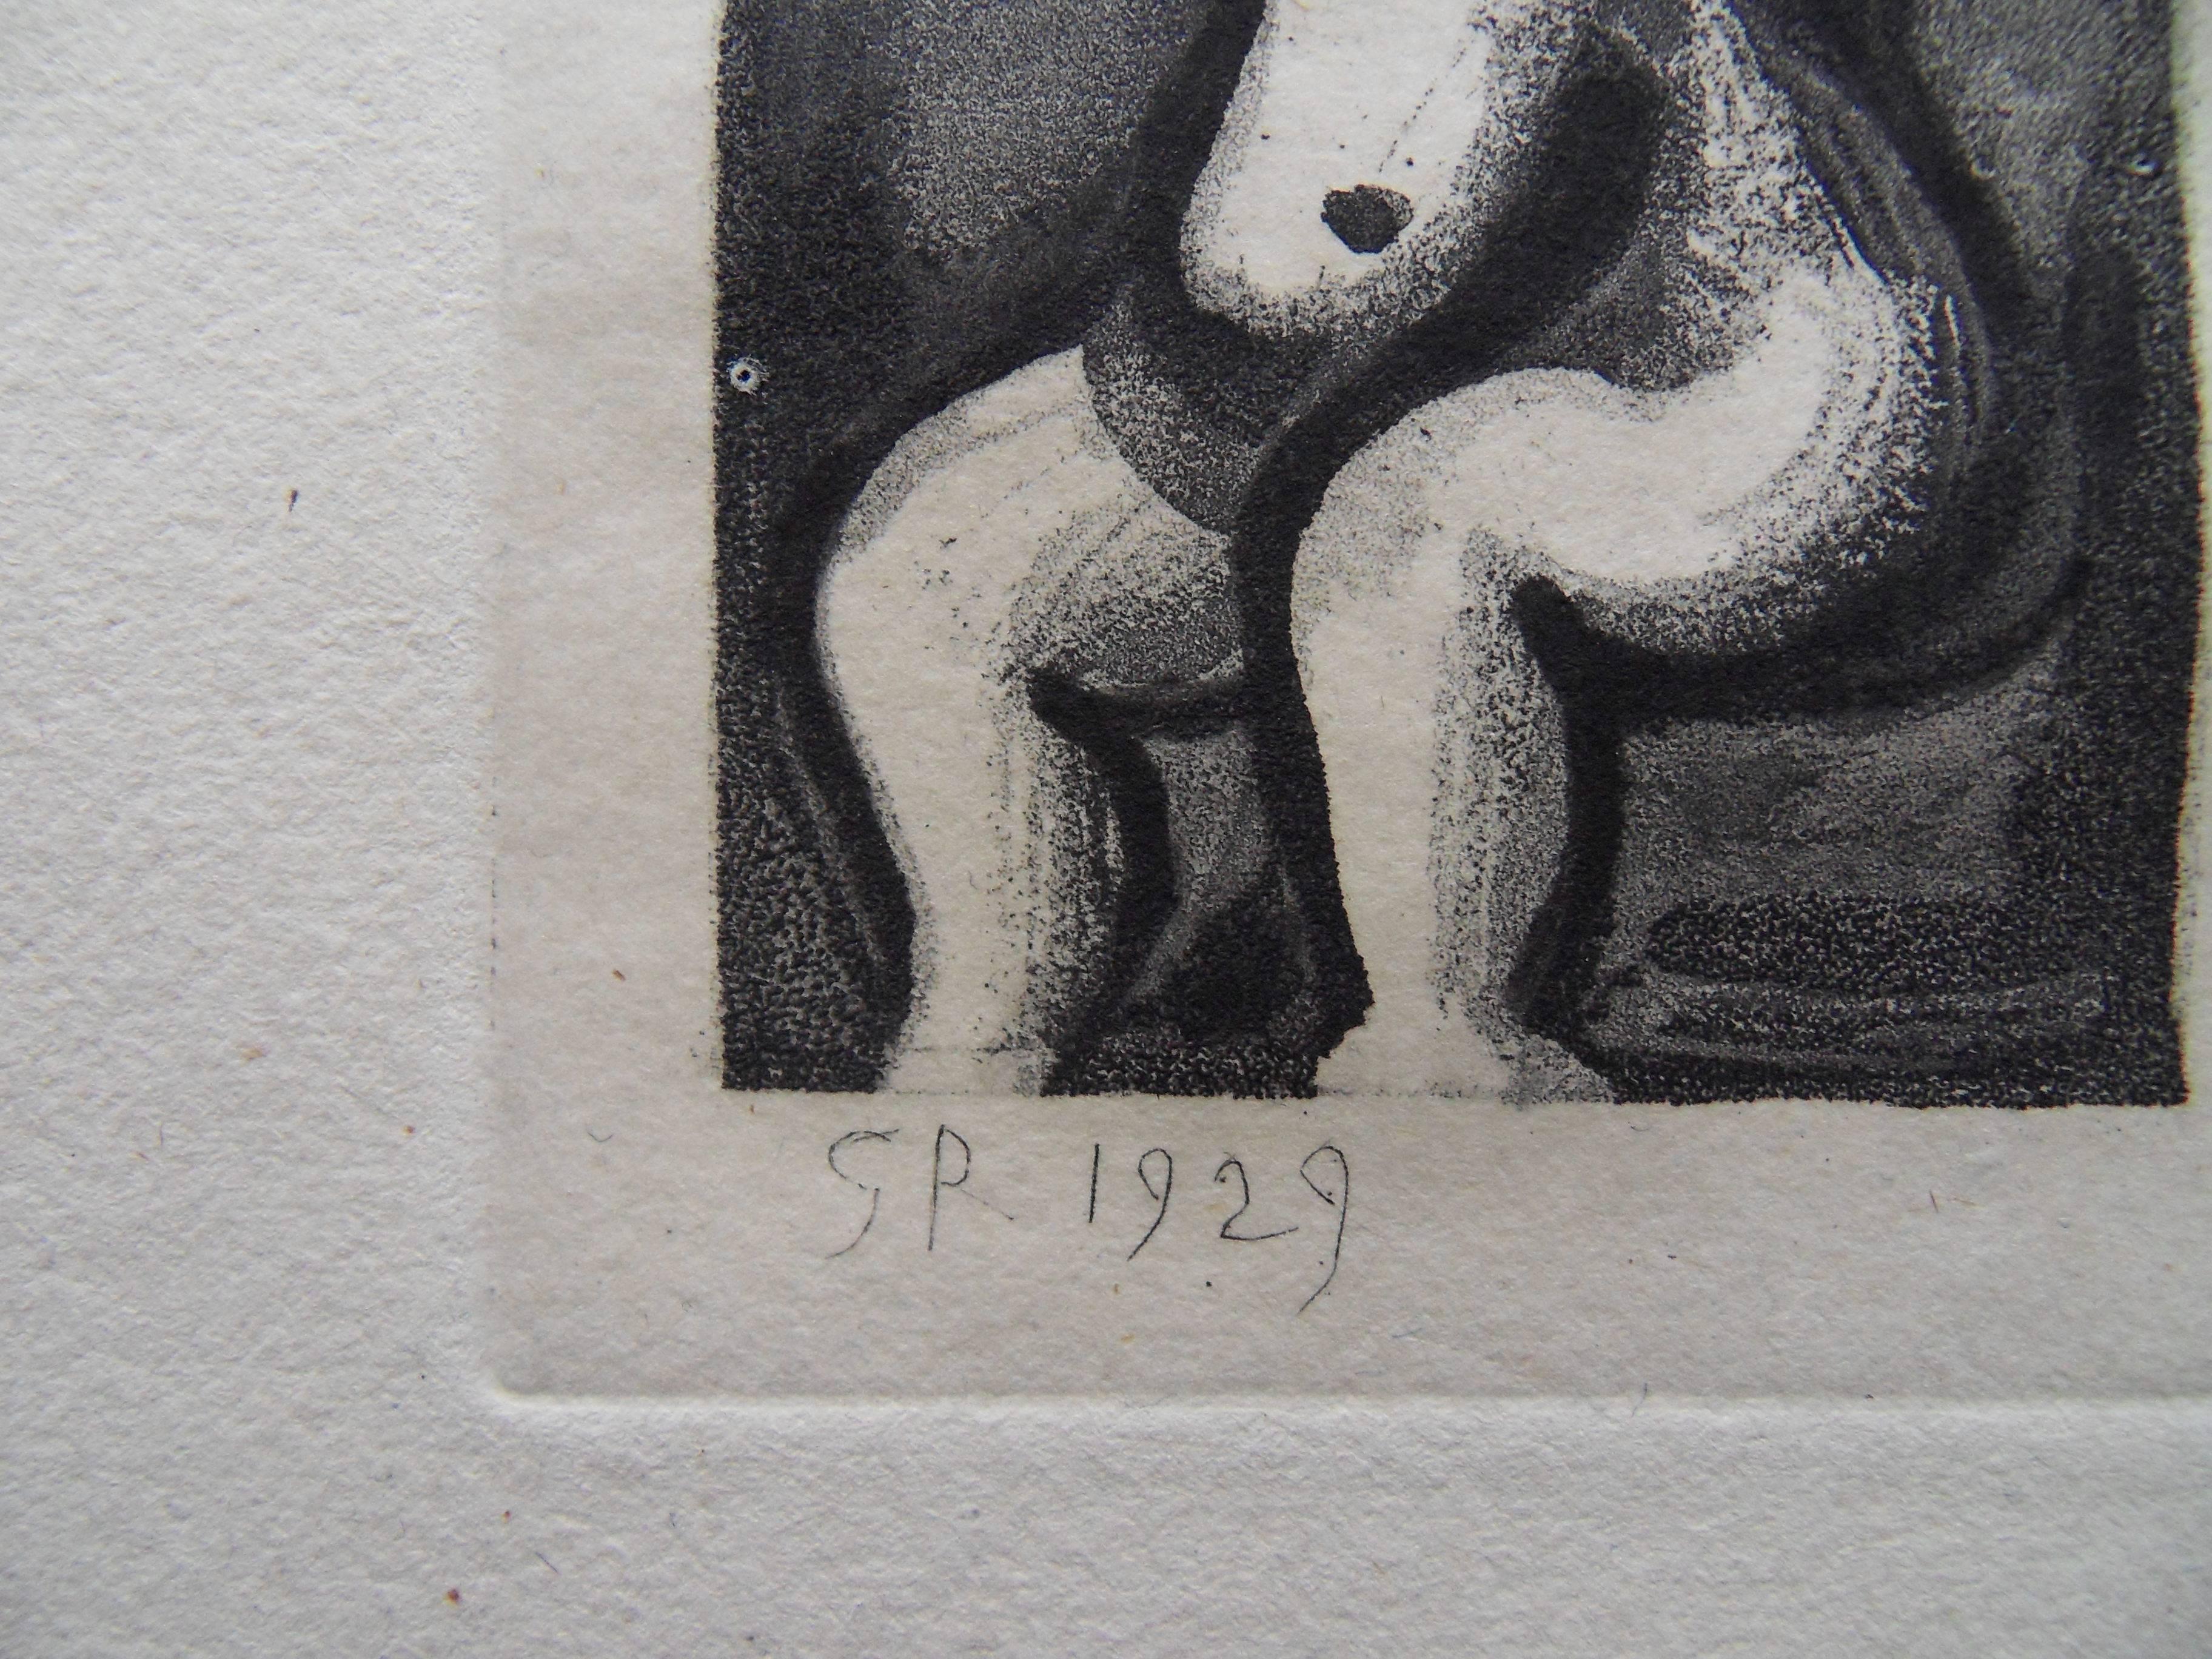 Woman Cleaning her Hair - Original etching - 1929 - Print by Georges Rouault